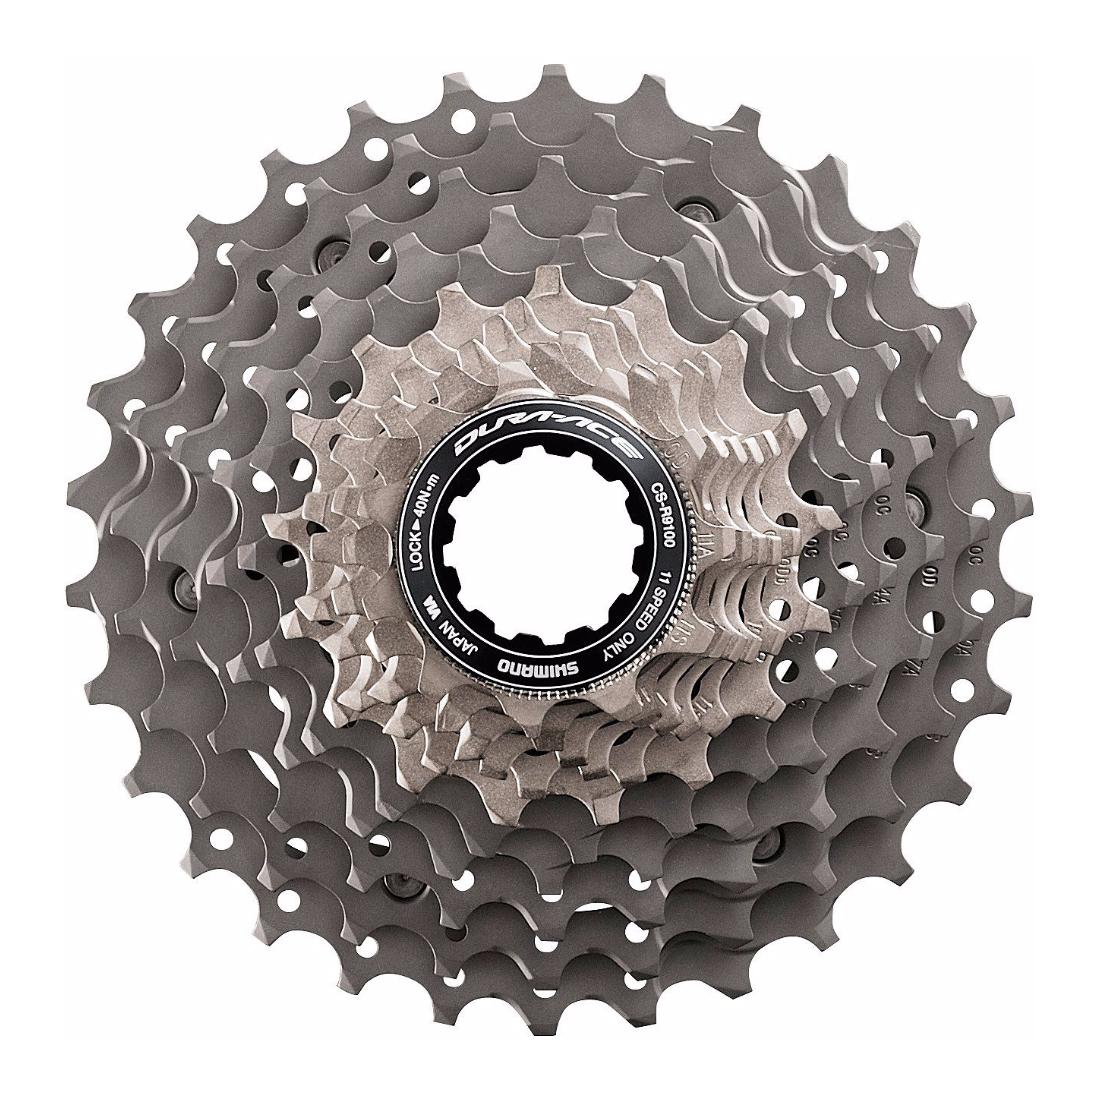 Shimano Dura Ace R9100 11 Speed 11-30 Cassette - Silver